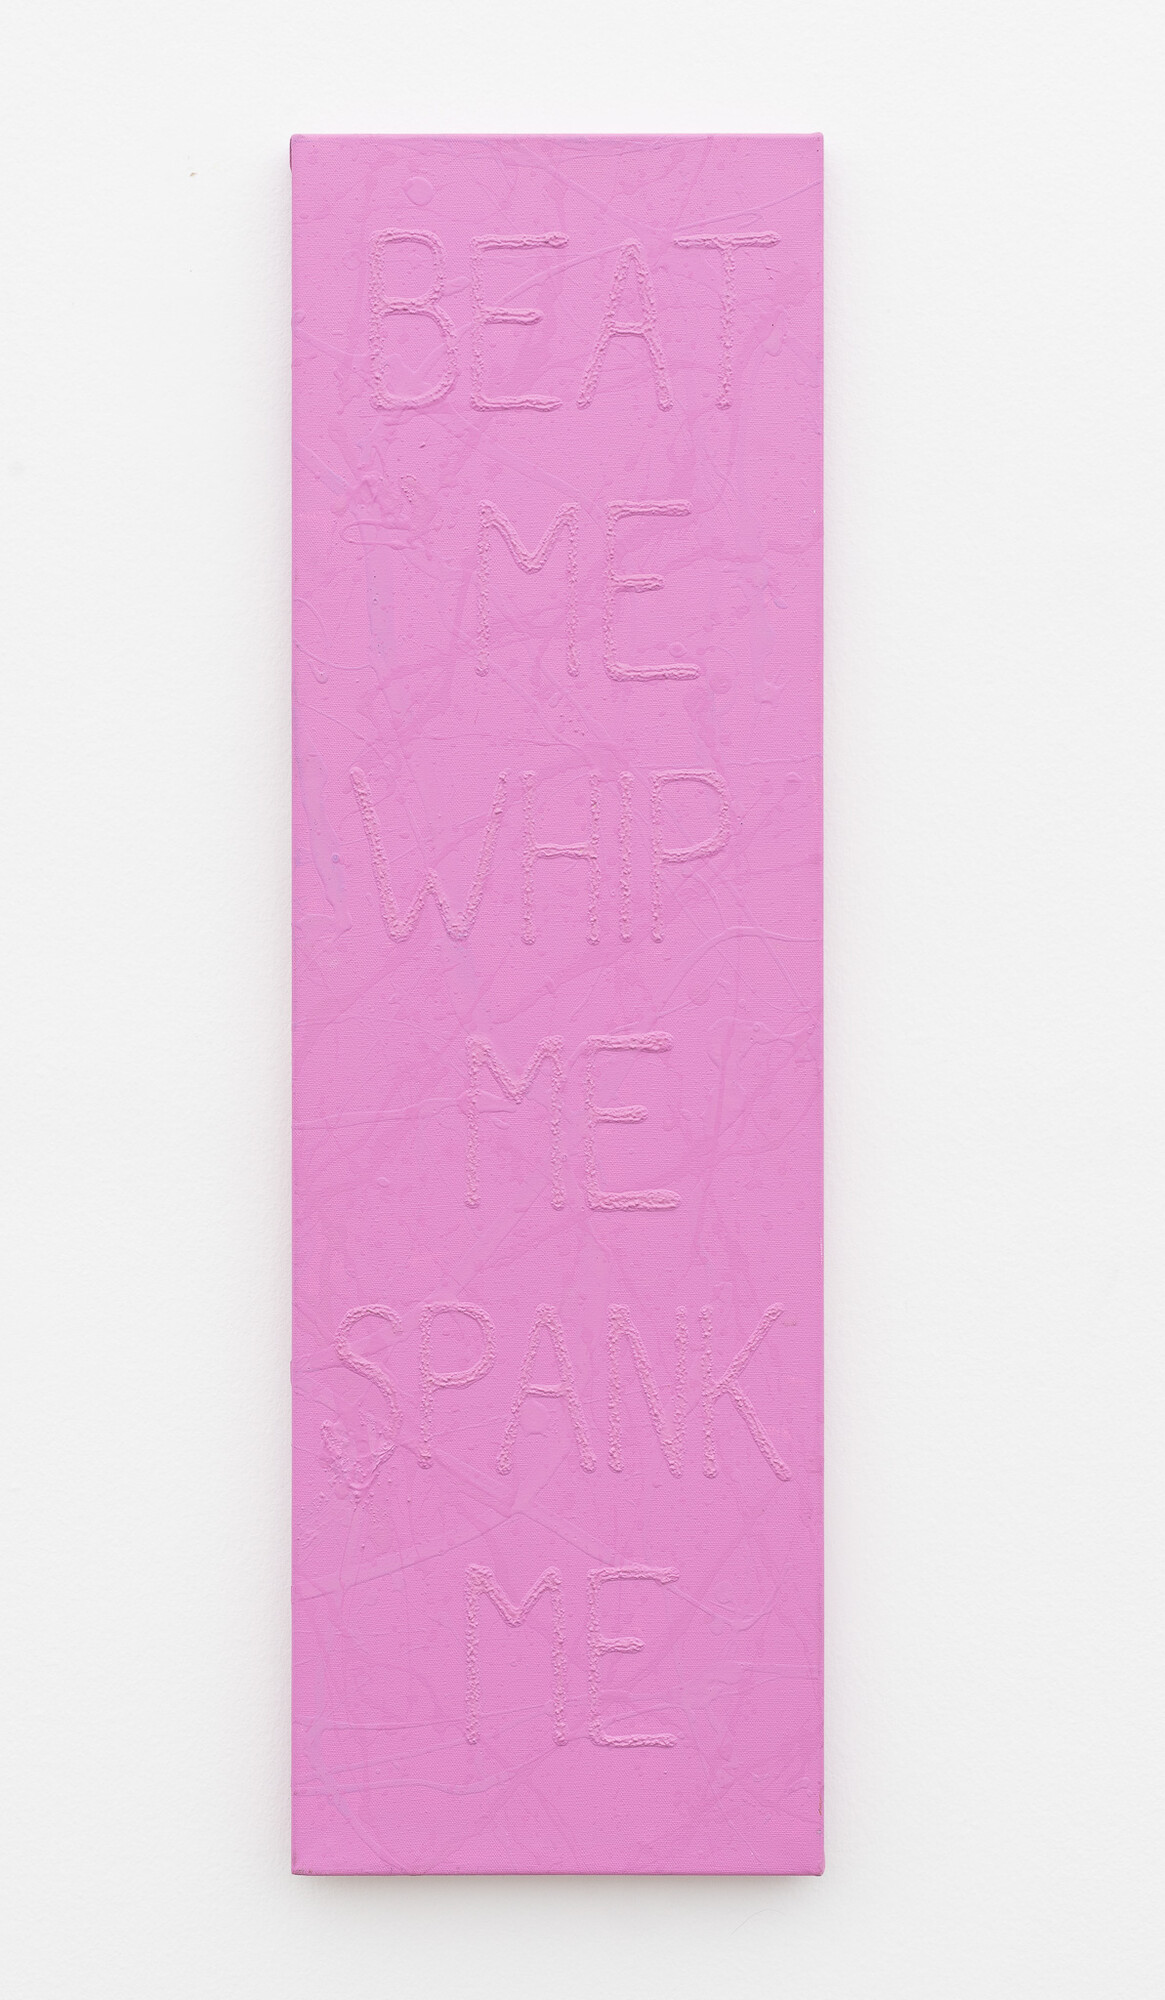 Richard Bell, <em>Make It Right</em>, 2002, synthetic polymer paint on canvas, 91.0 x 28.0 cm. Courtesy of the artist and Neon Parc.